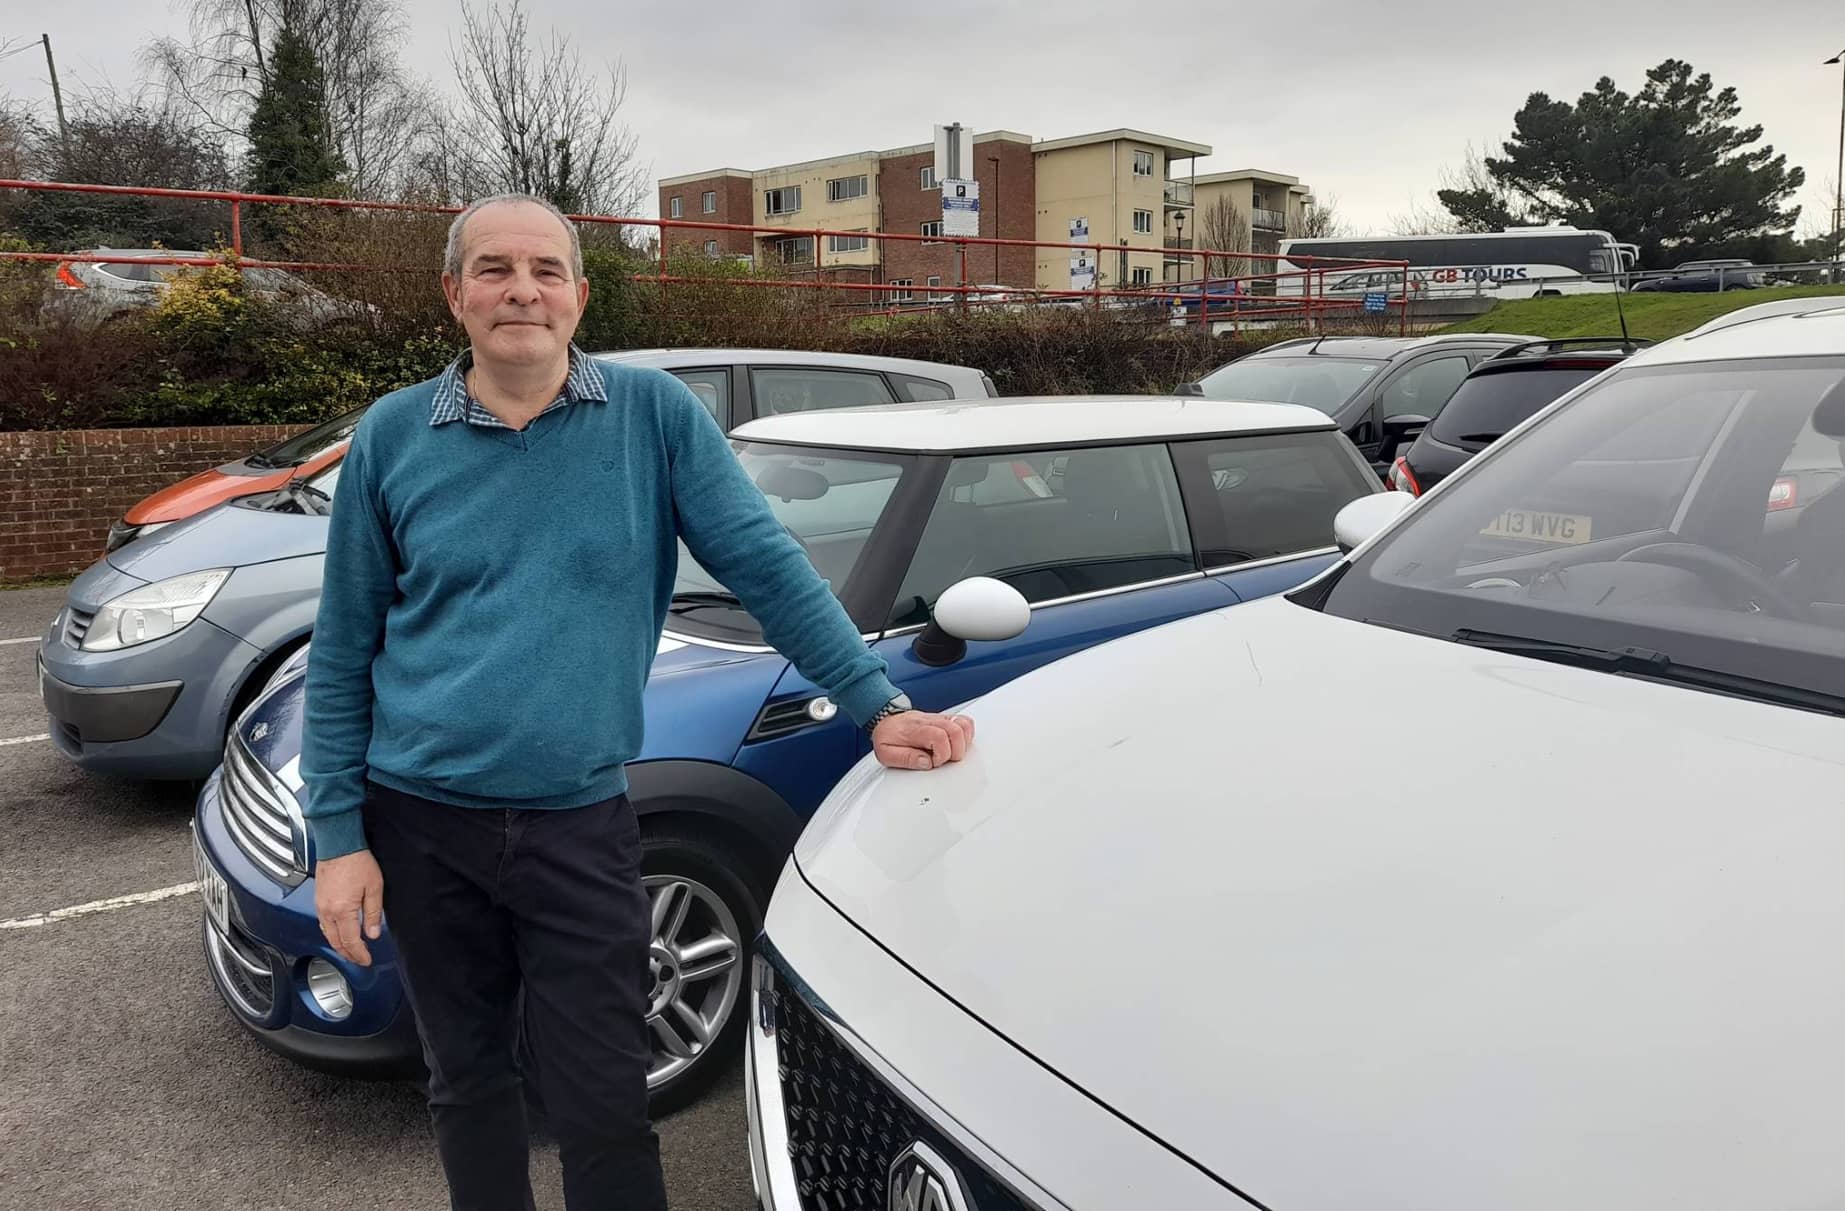 Alan standing by his car in the Riverside Centre car park